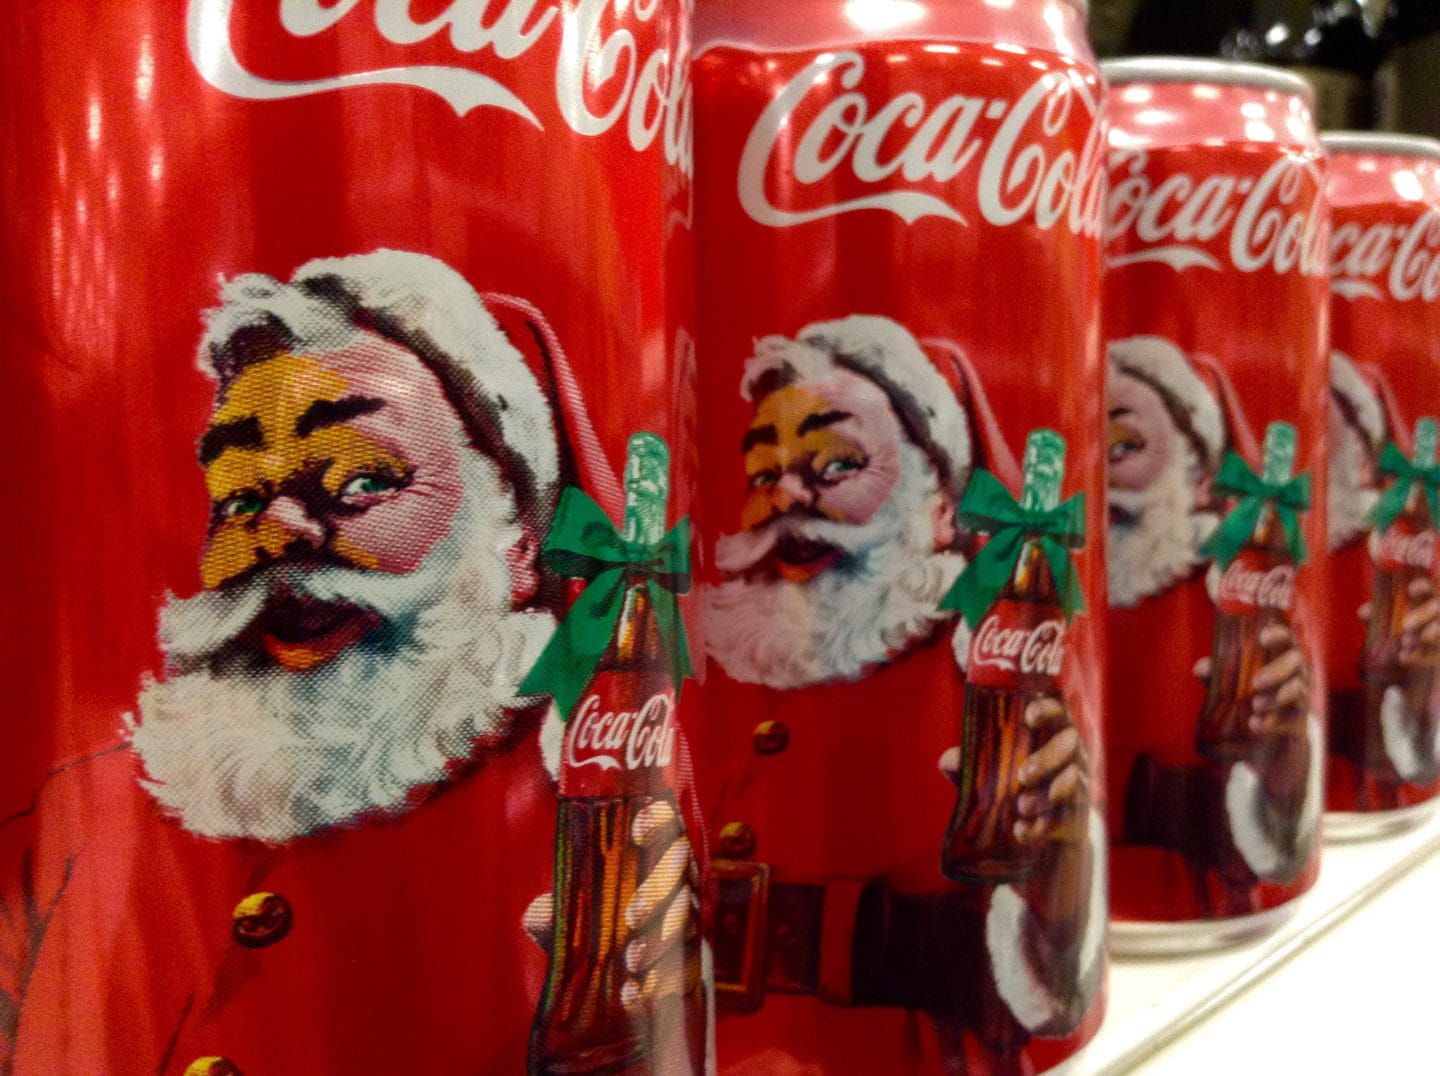 Is Santa Claus red because of Coca-Cola?